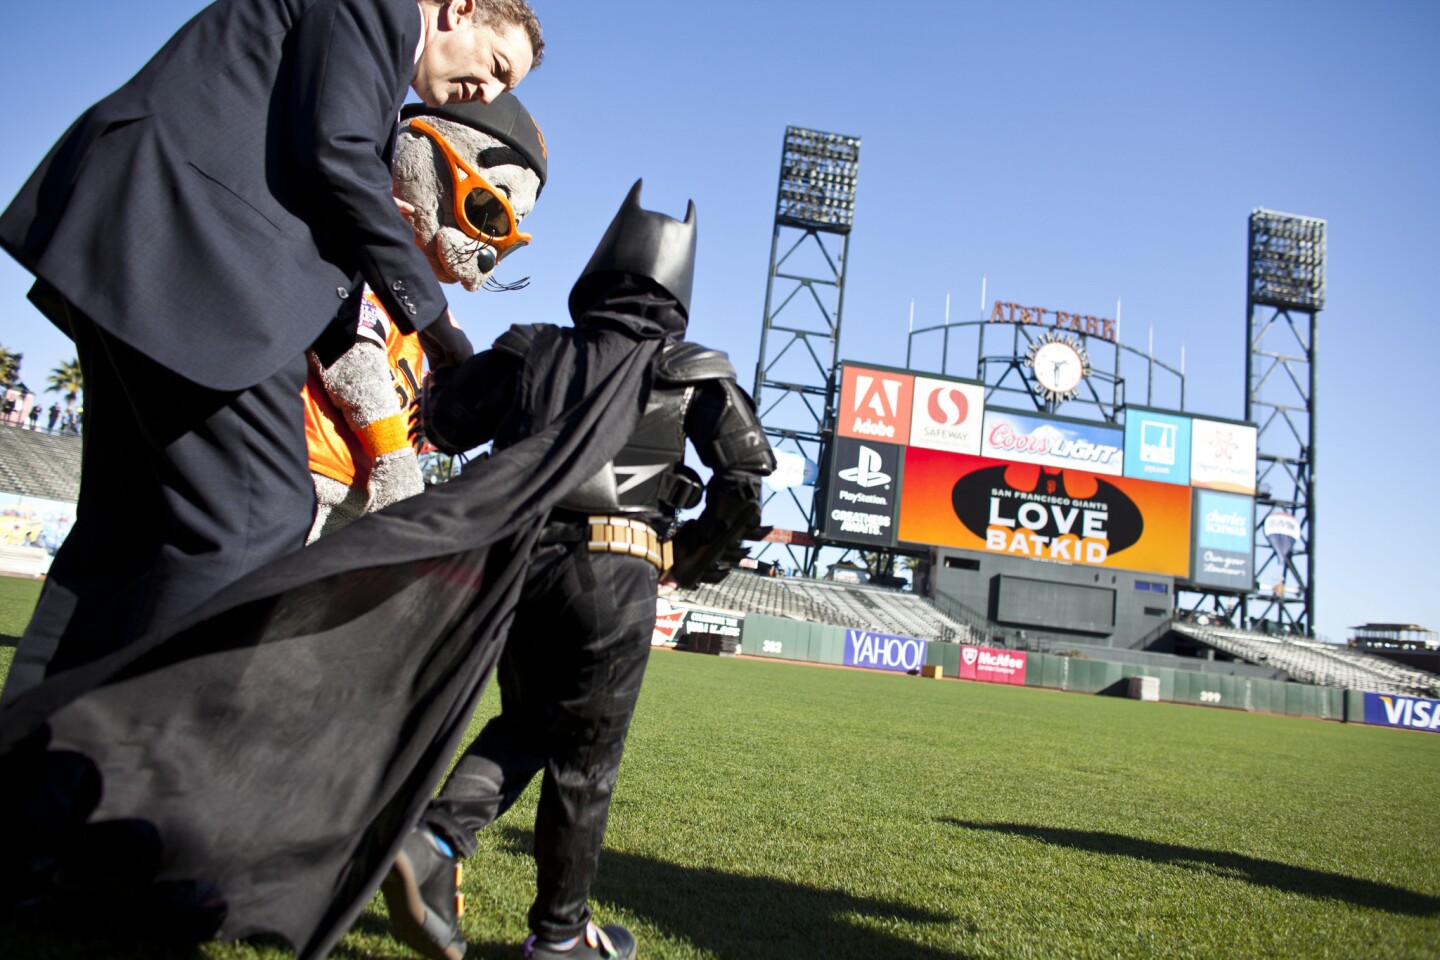 Larry Baer, chief executive of the San Francisco Giants, and the team's mascot, Lou Seal, escort Batkid to the outfield to see a special message on the scoreboard.